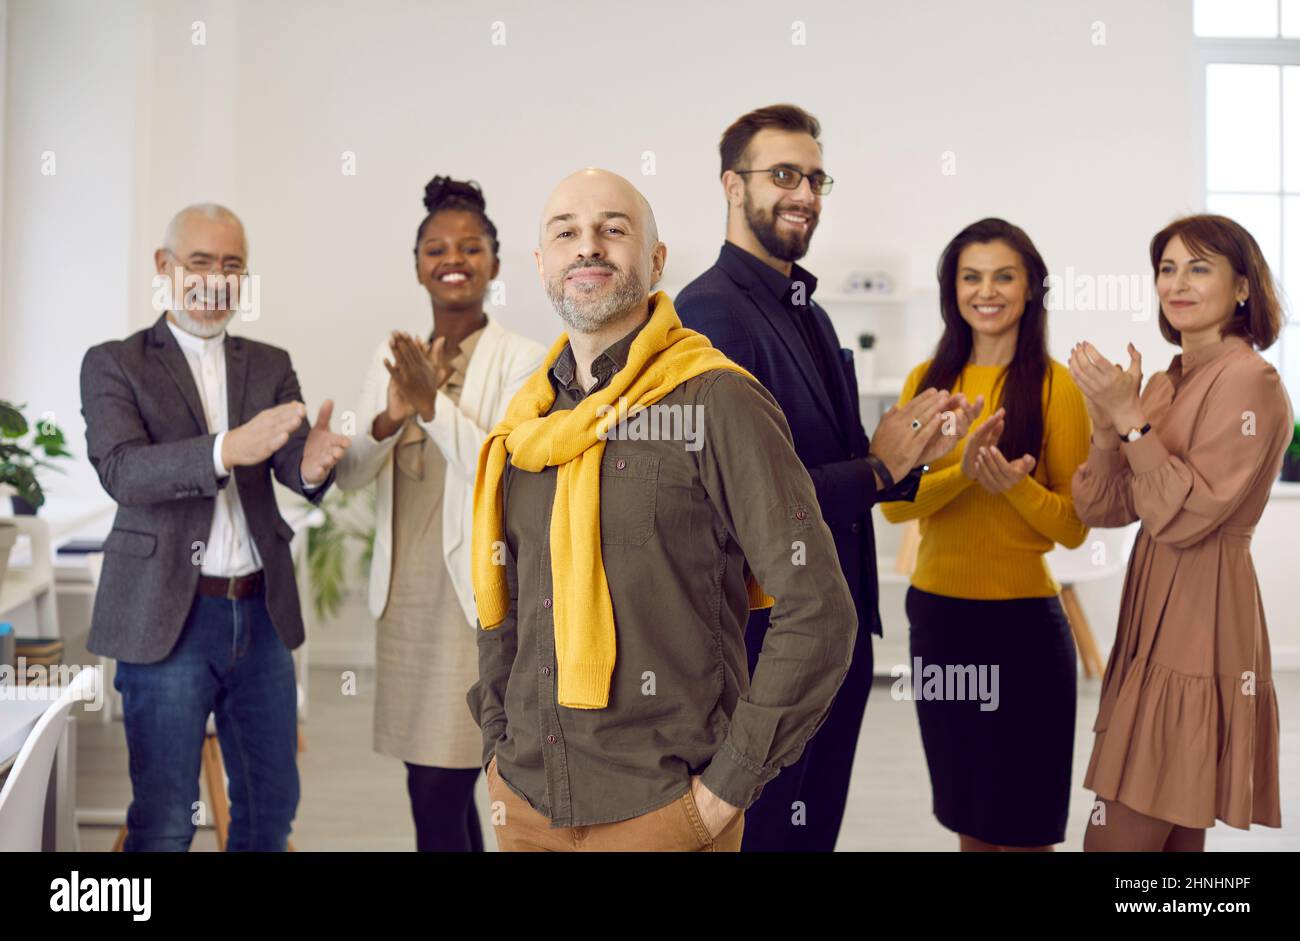 Smiling diverse employee greeting male employee with promotion Stock Photo